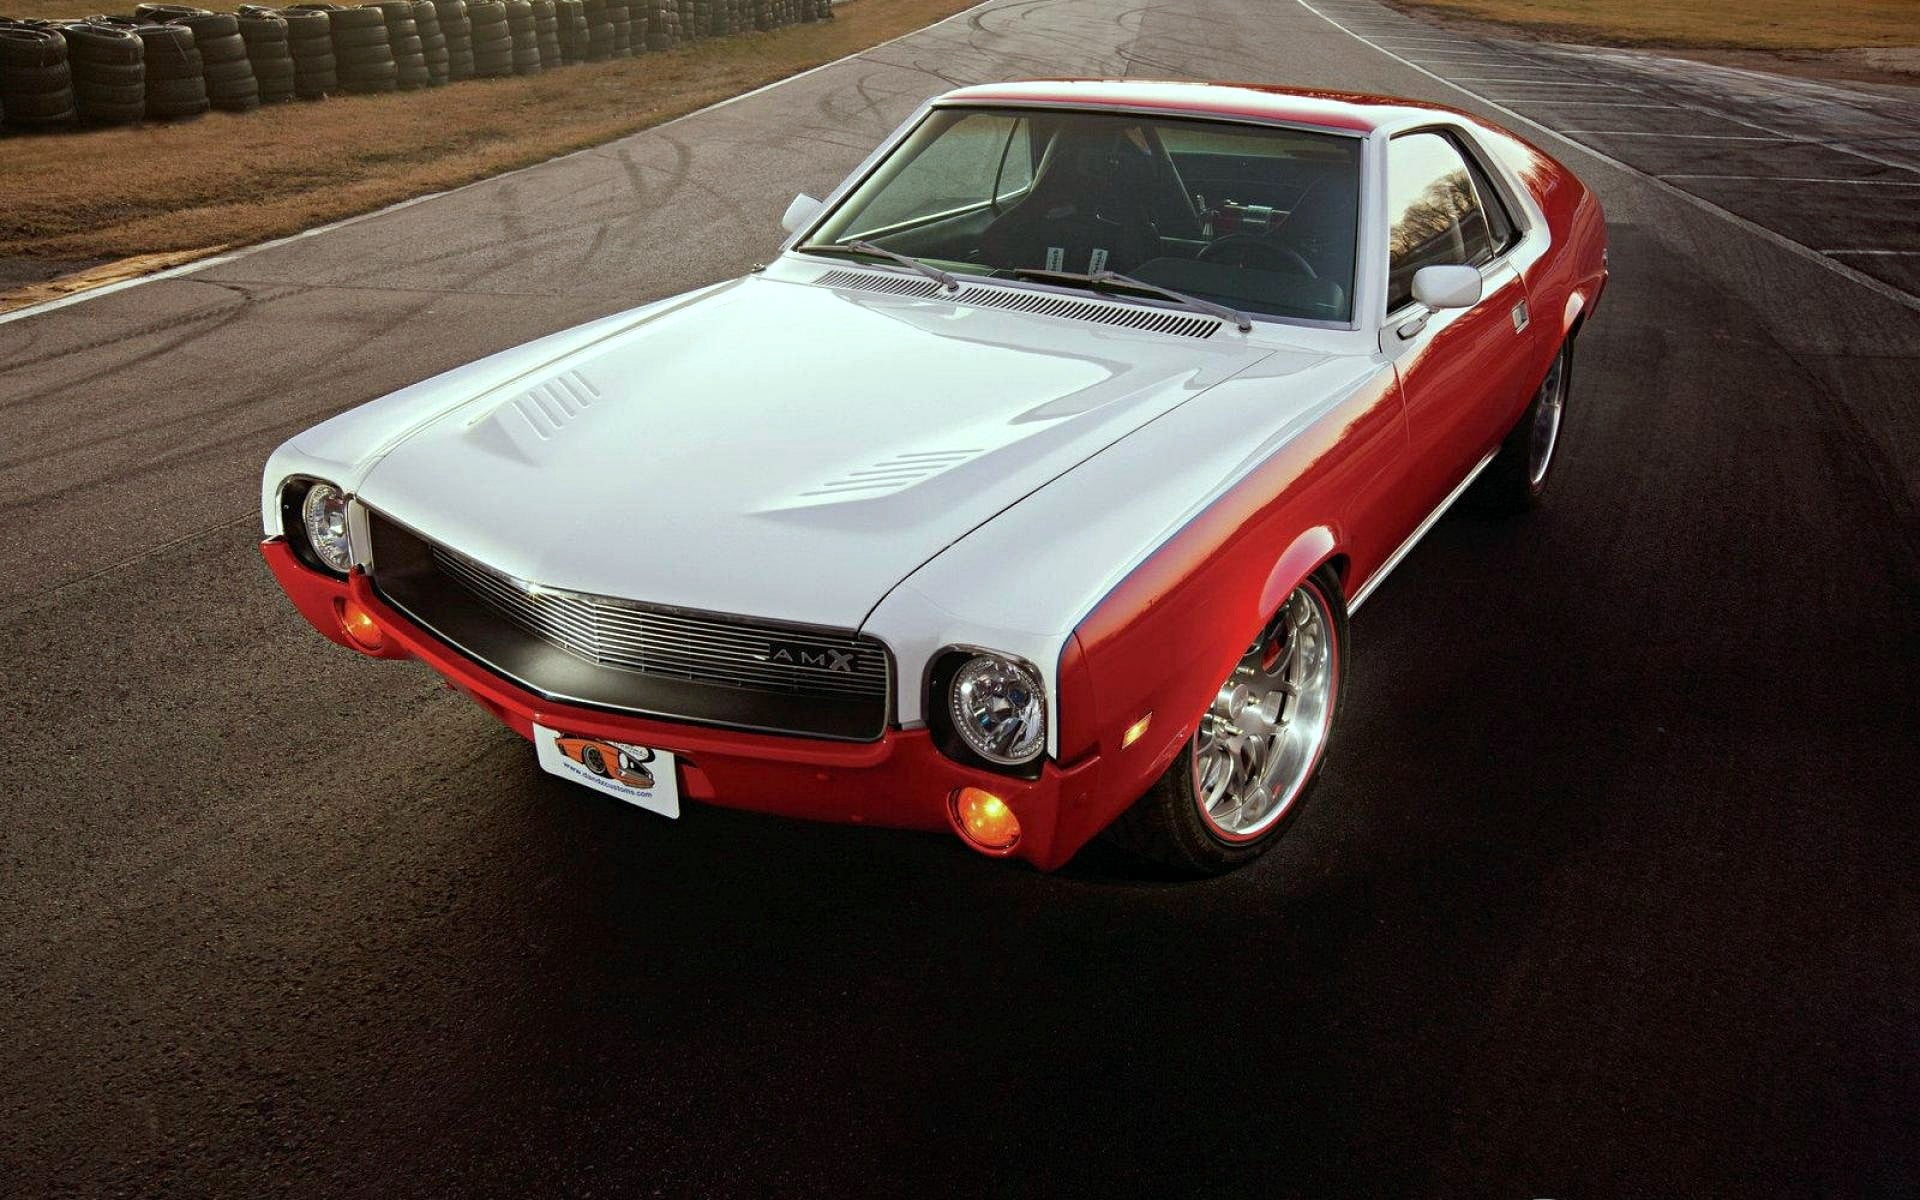 white and red coupe, 1969 amc amx, american muscle car, style